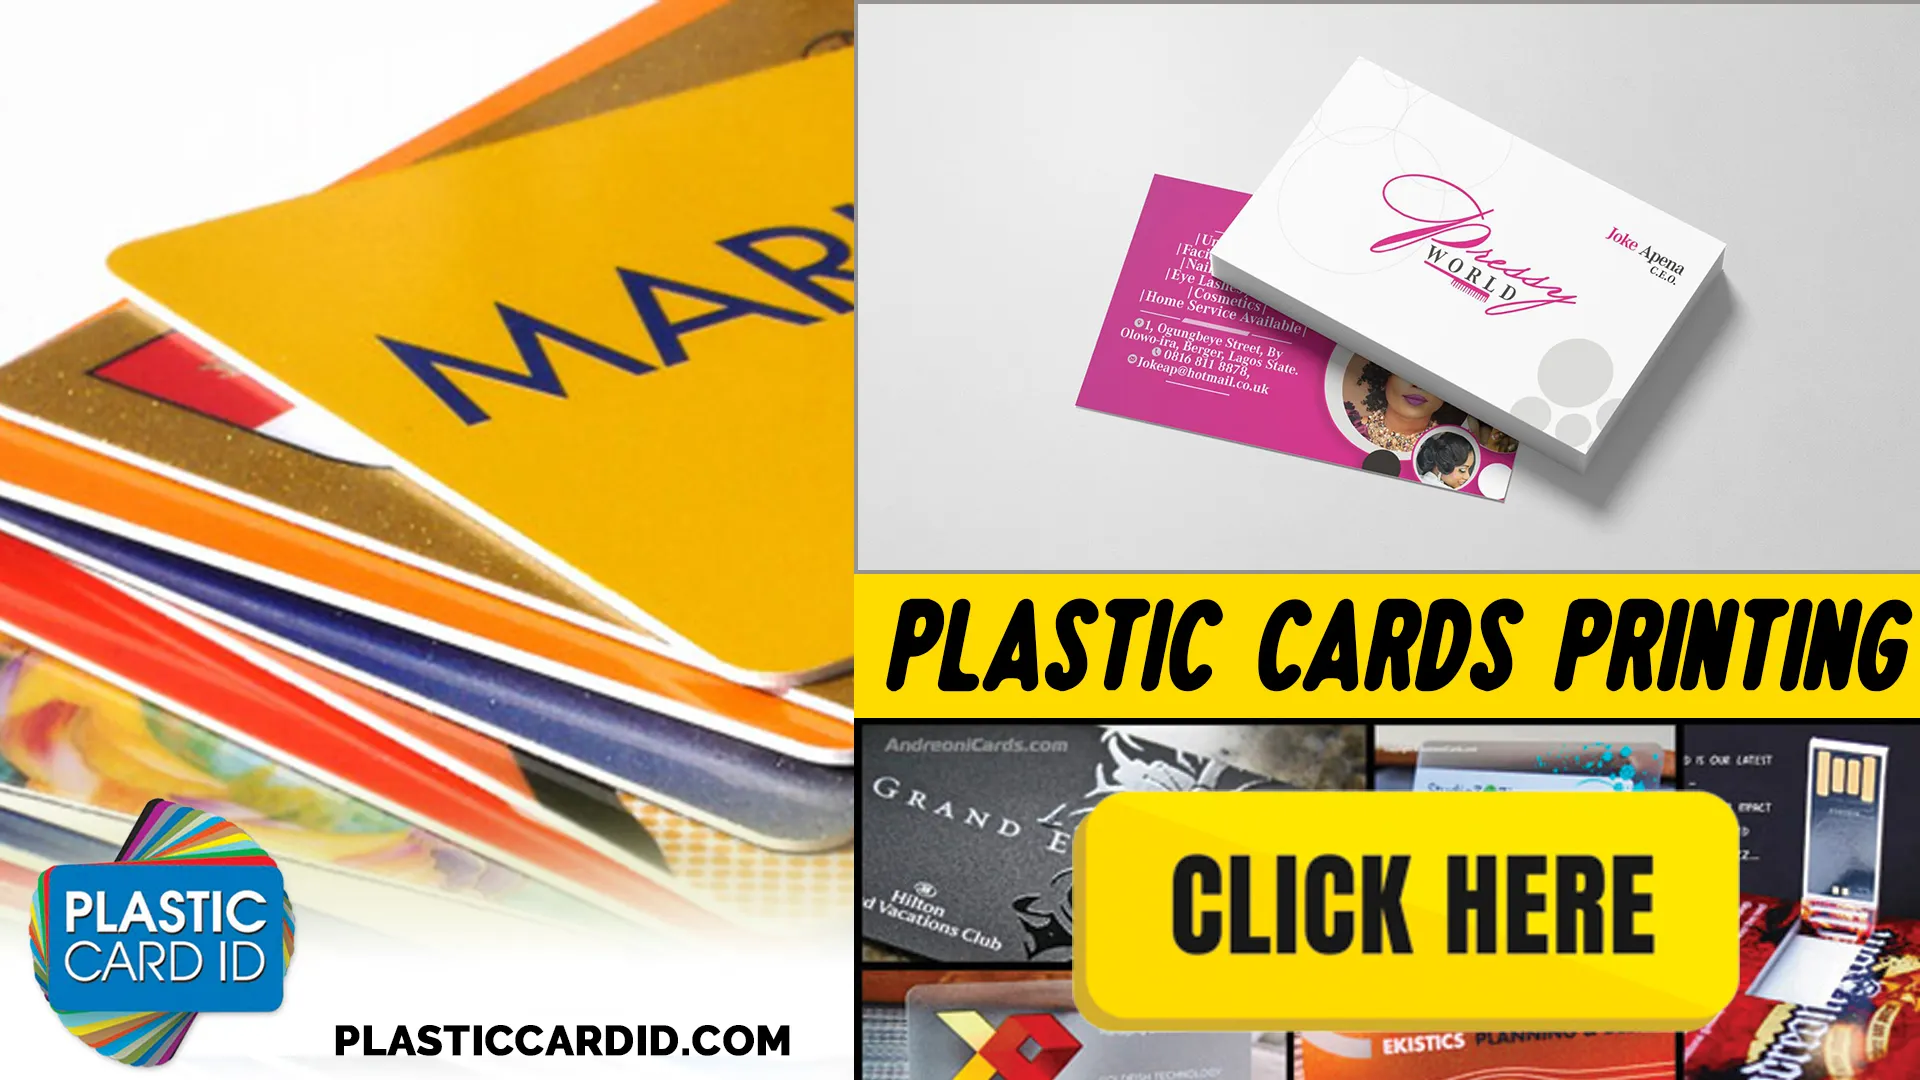 Customization Options with Plastic Card ID
